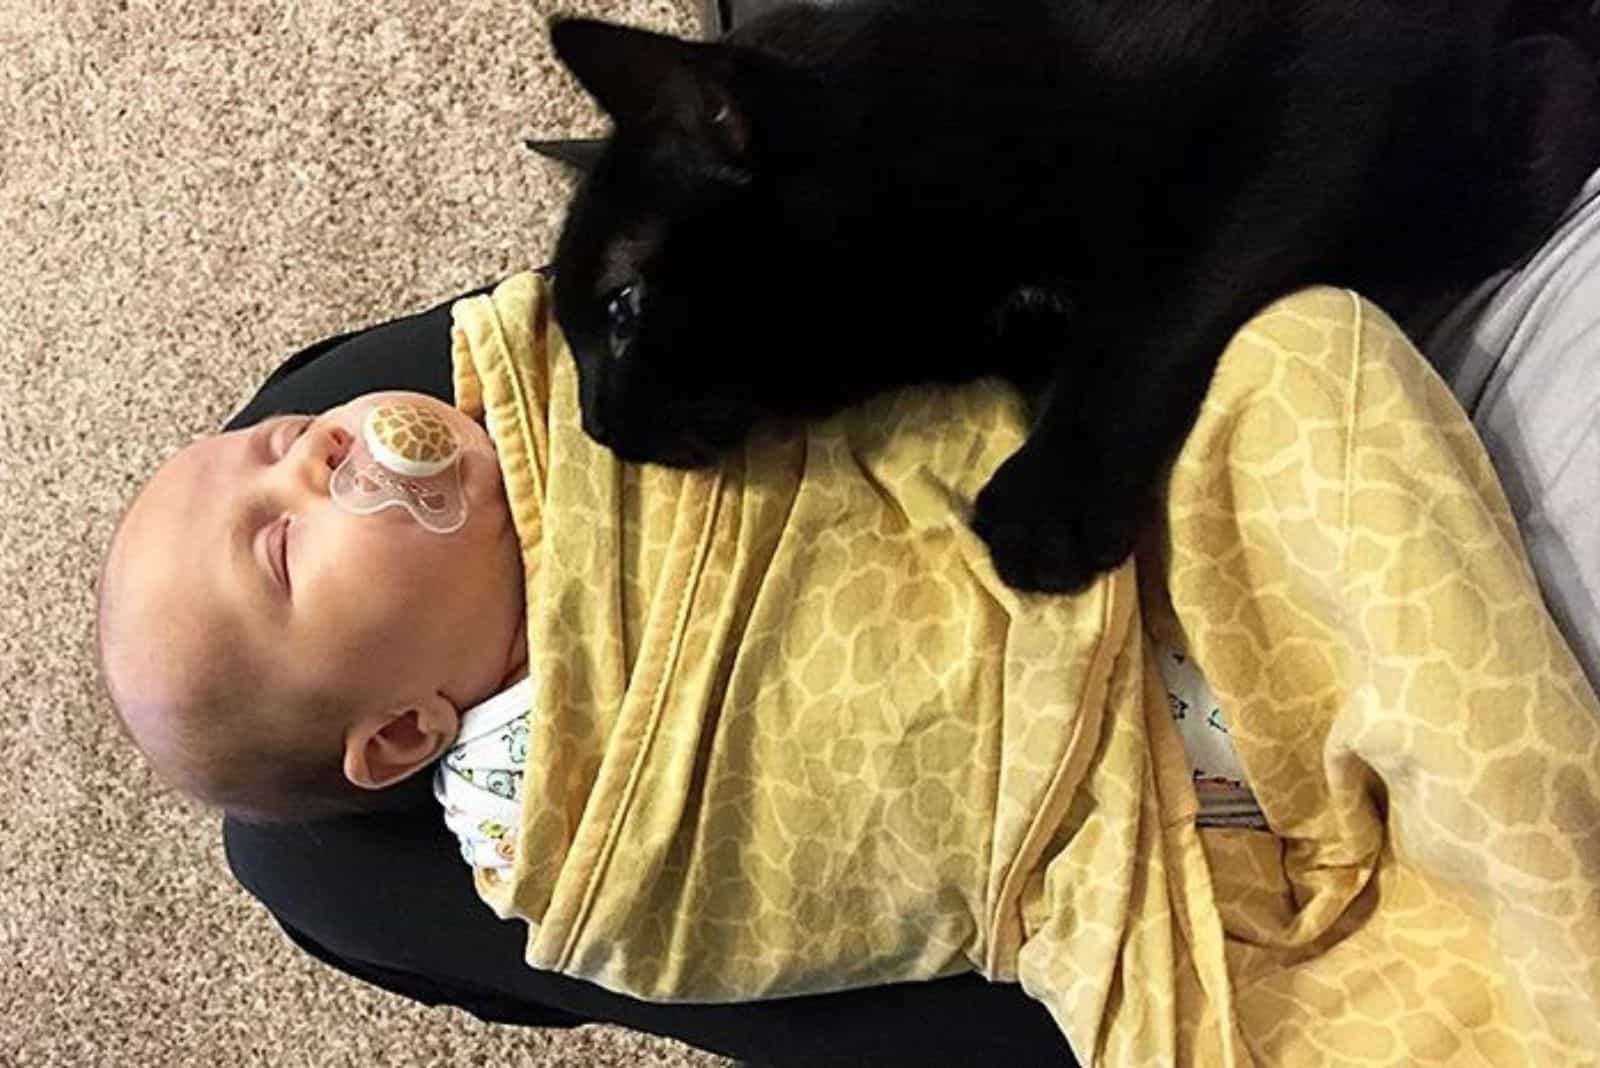 bruce the cat lying next to a baby